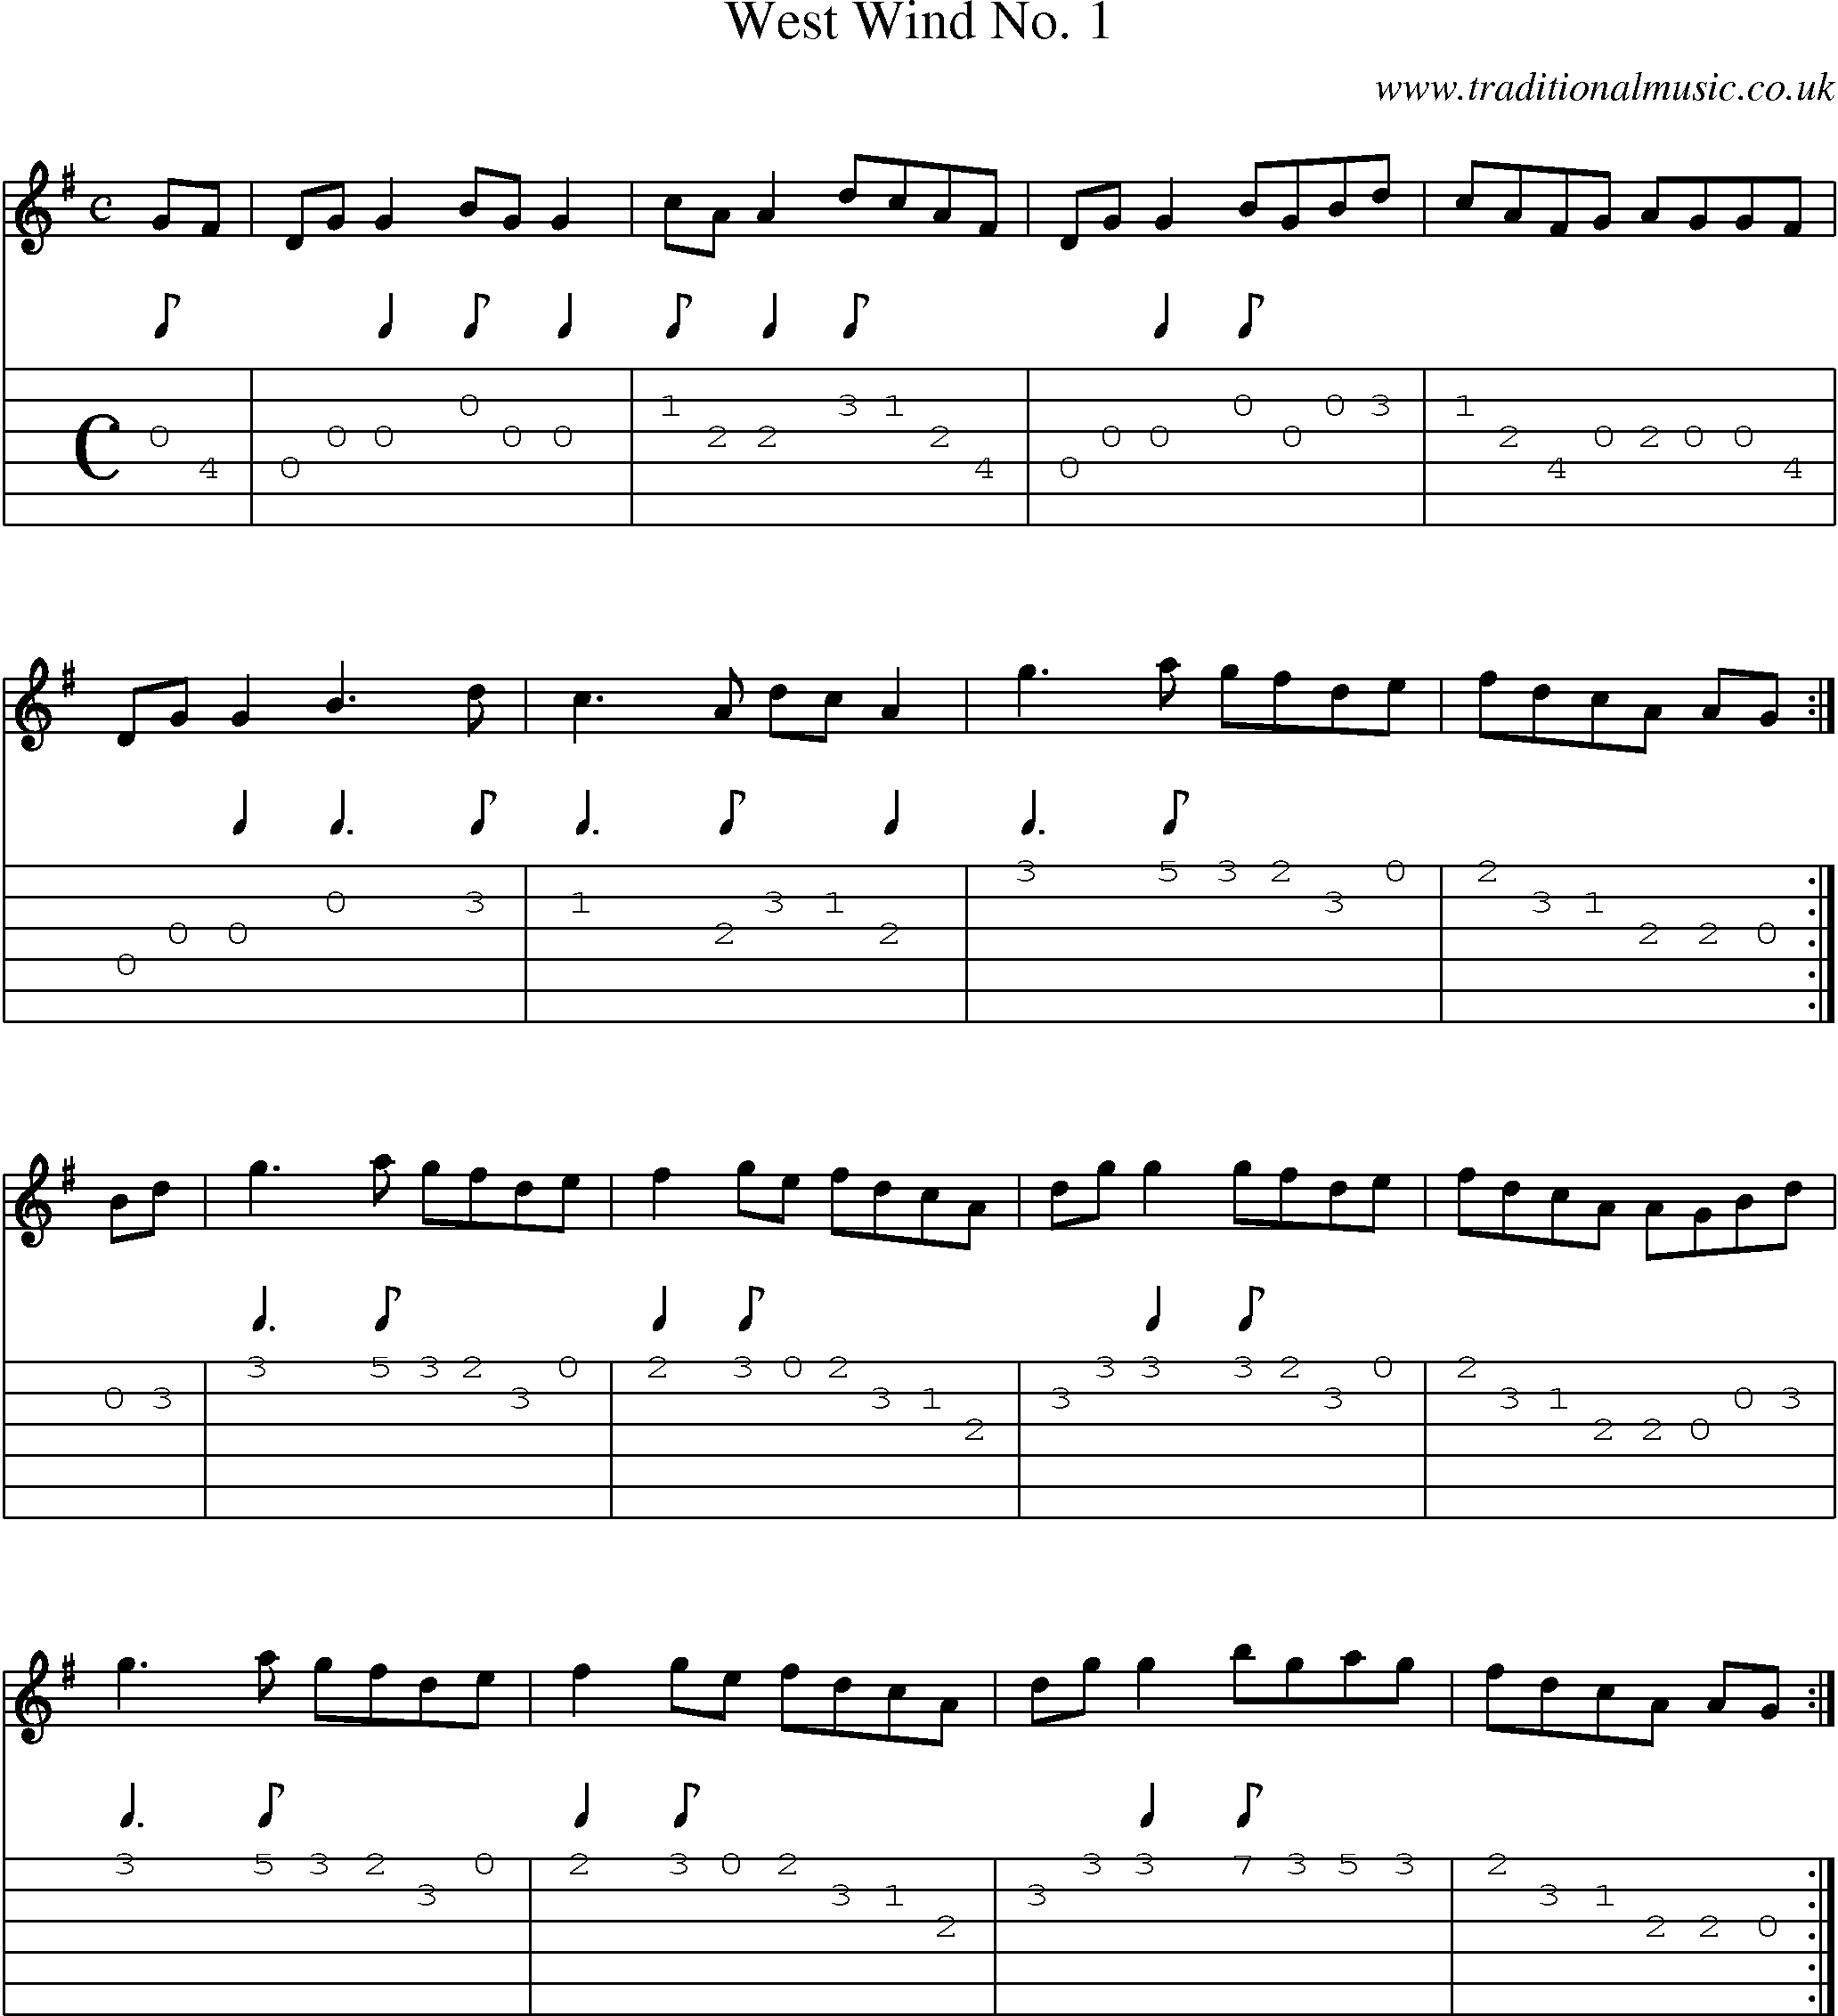 Music Score and Guitar Tabs for West Wind No 1